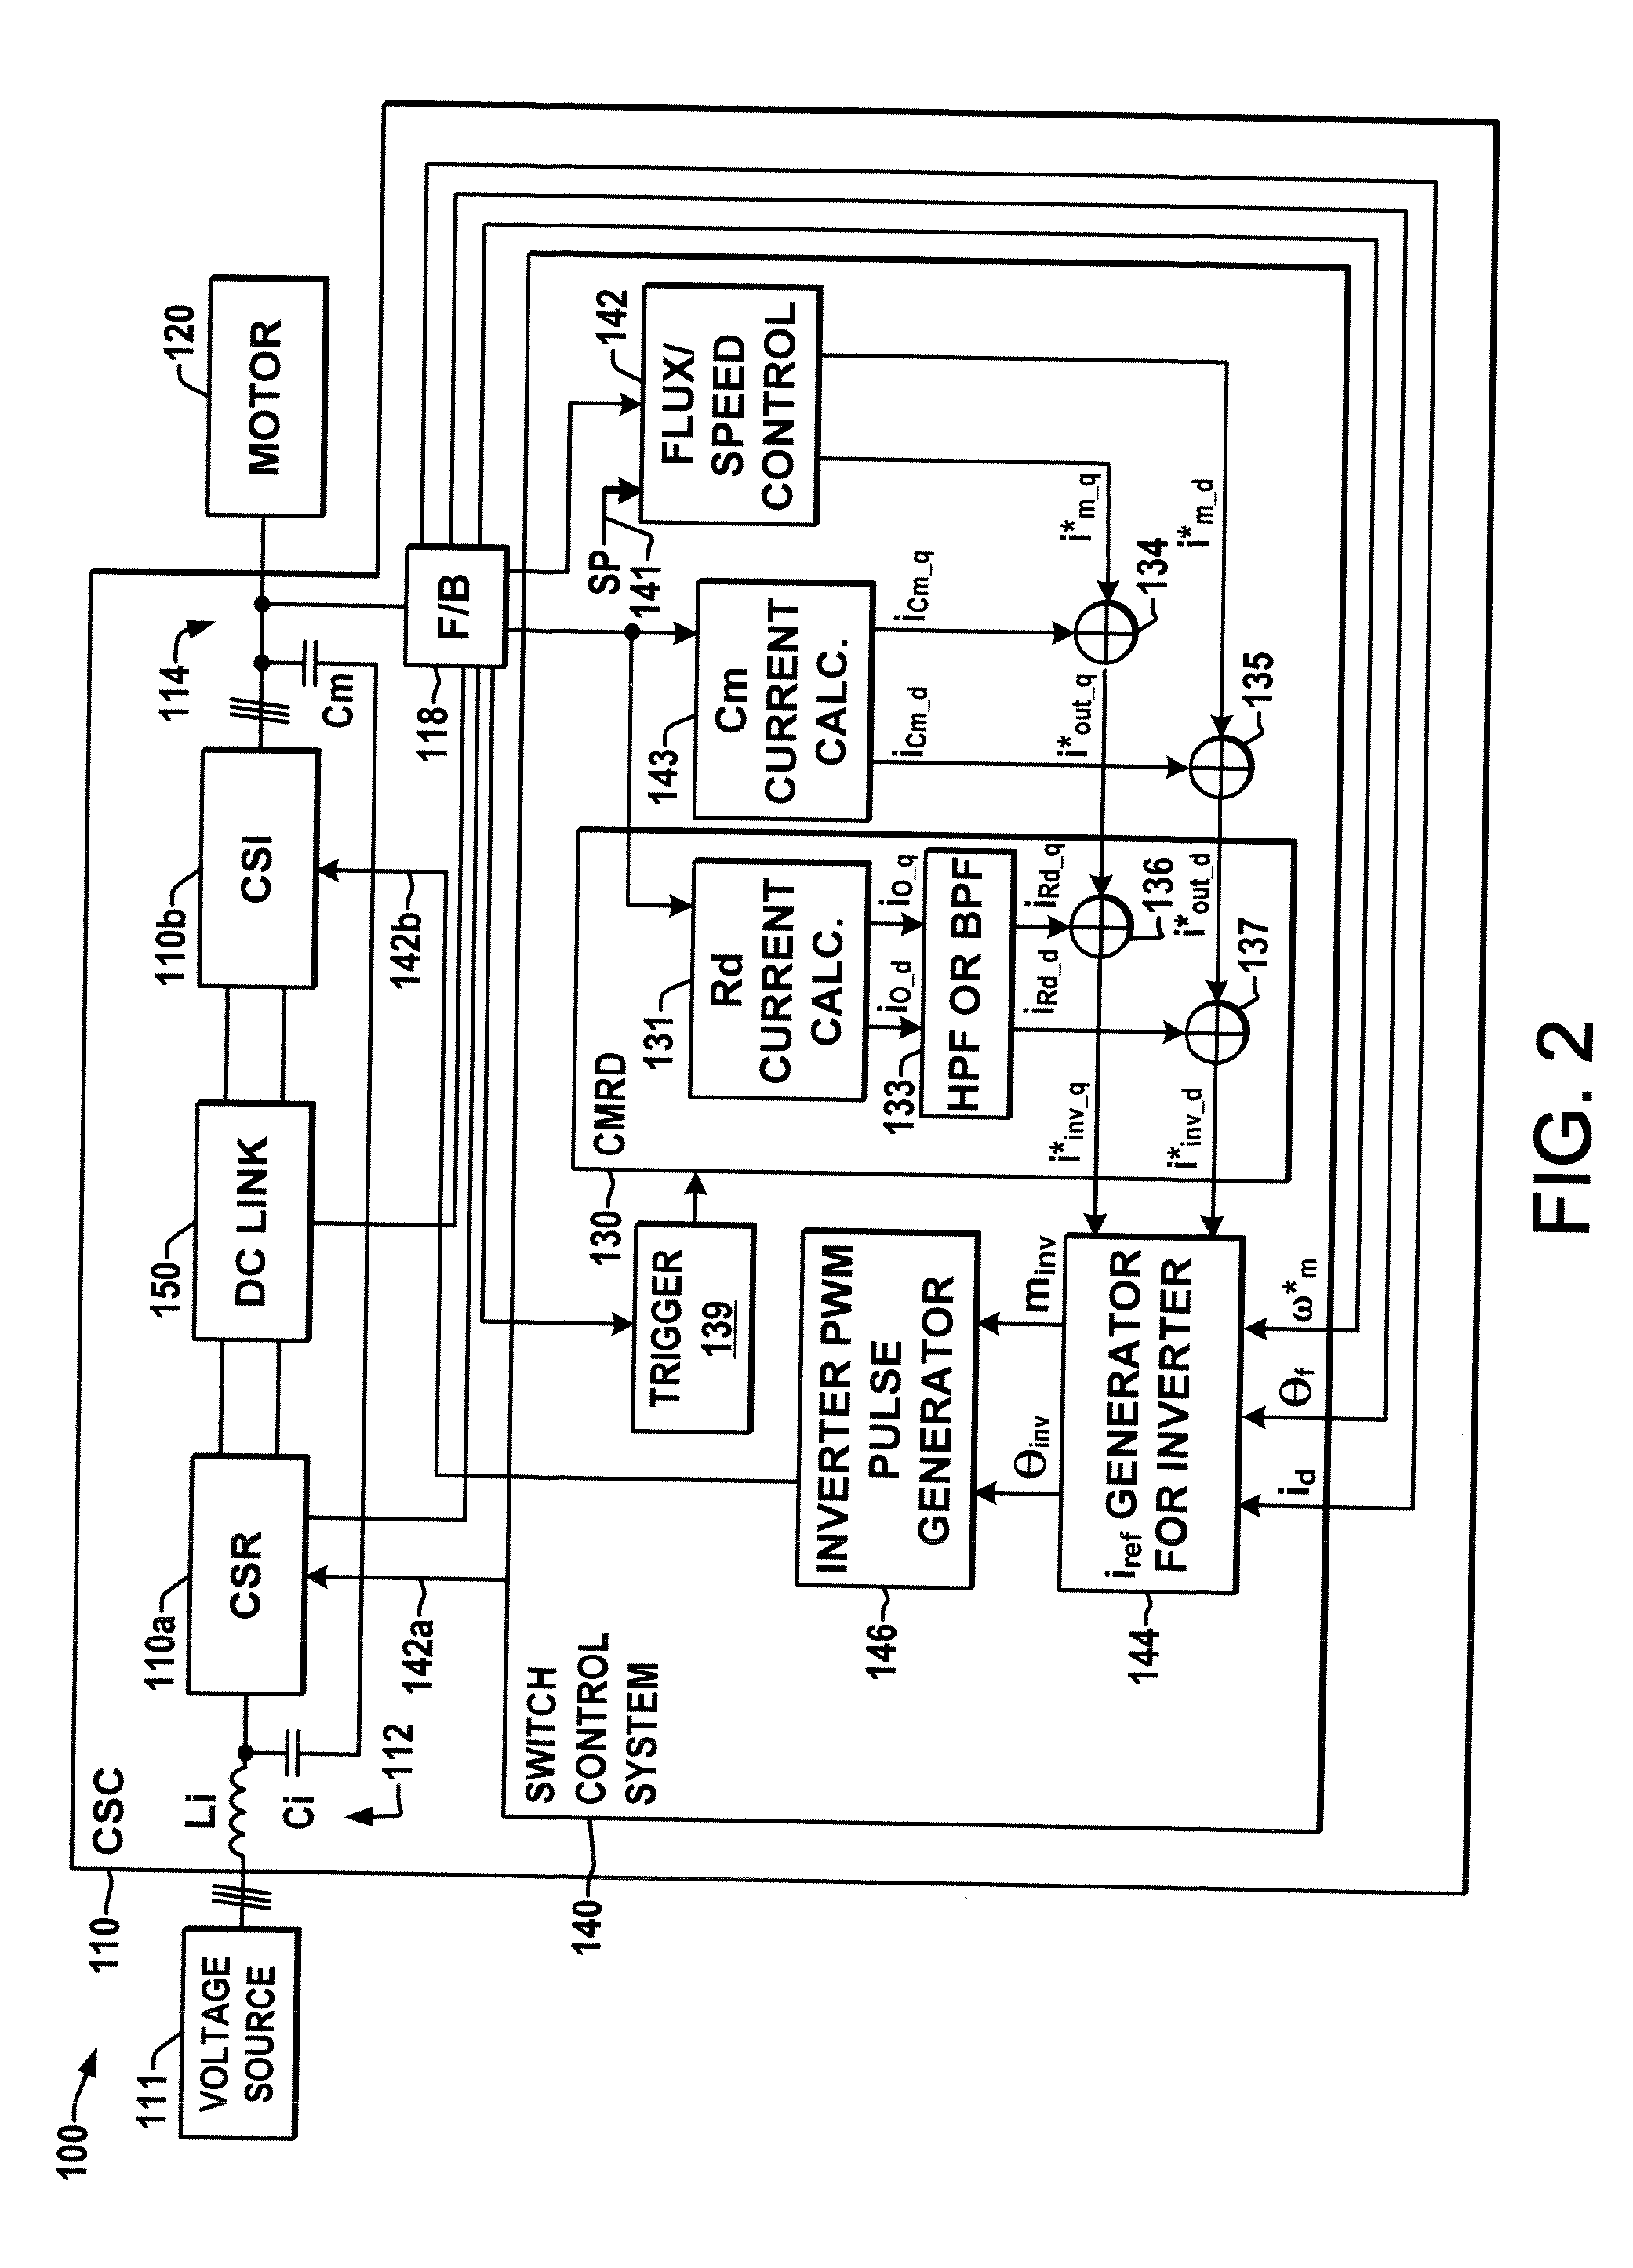 Power conversion system and method for active damping of common mode resonance